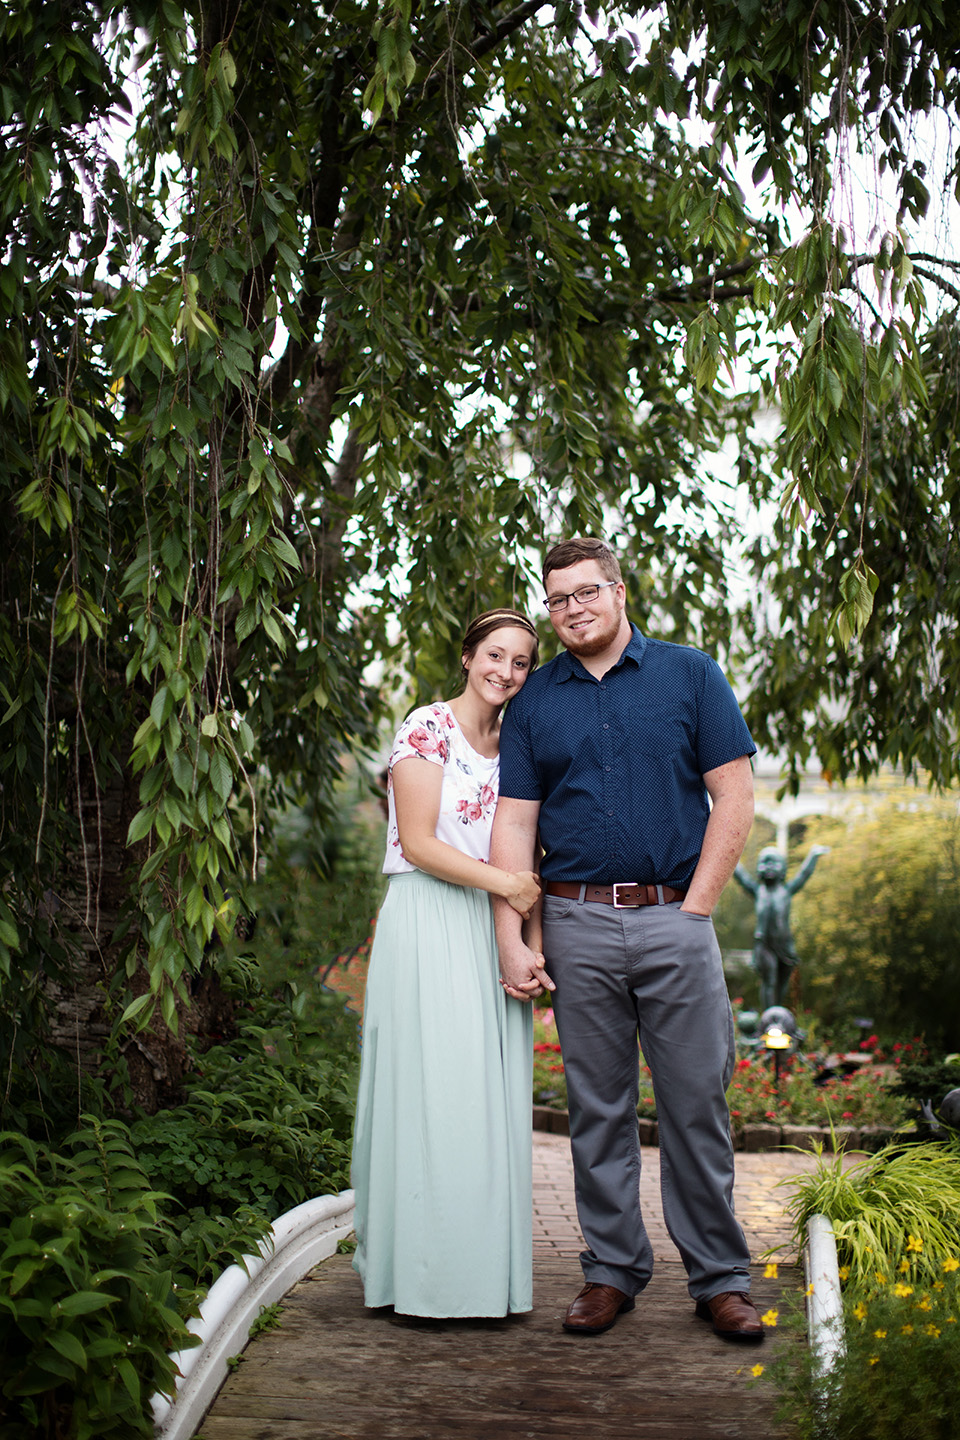 PHIPPS CONSERVATORY ENGAGEMENT PHOTO SESSION-PITTSBURGH, PA-LORENE+DUANE- 07